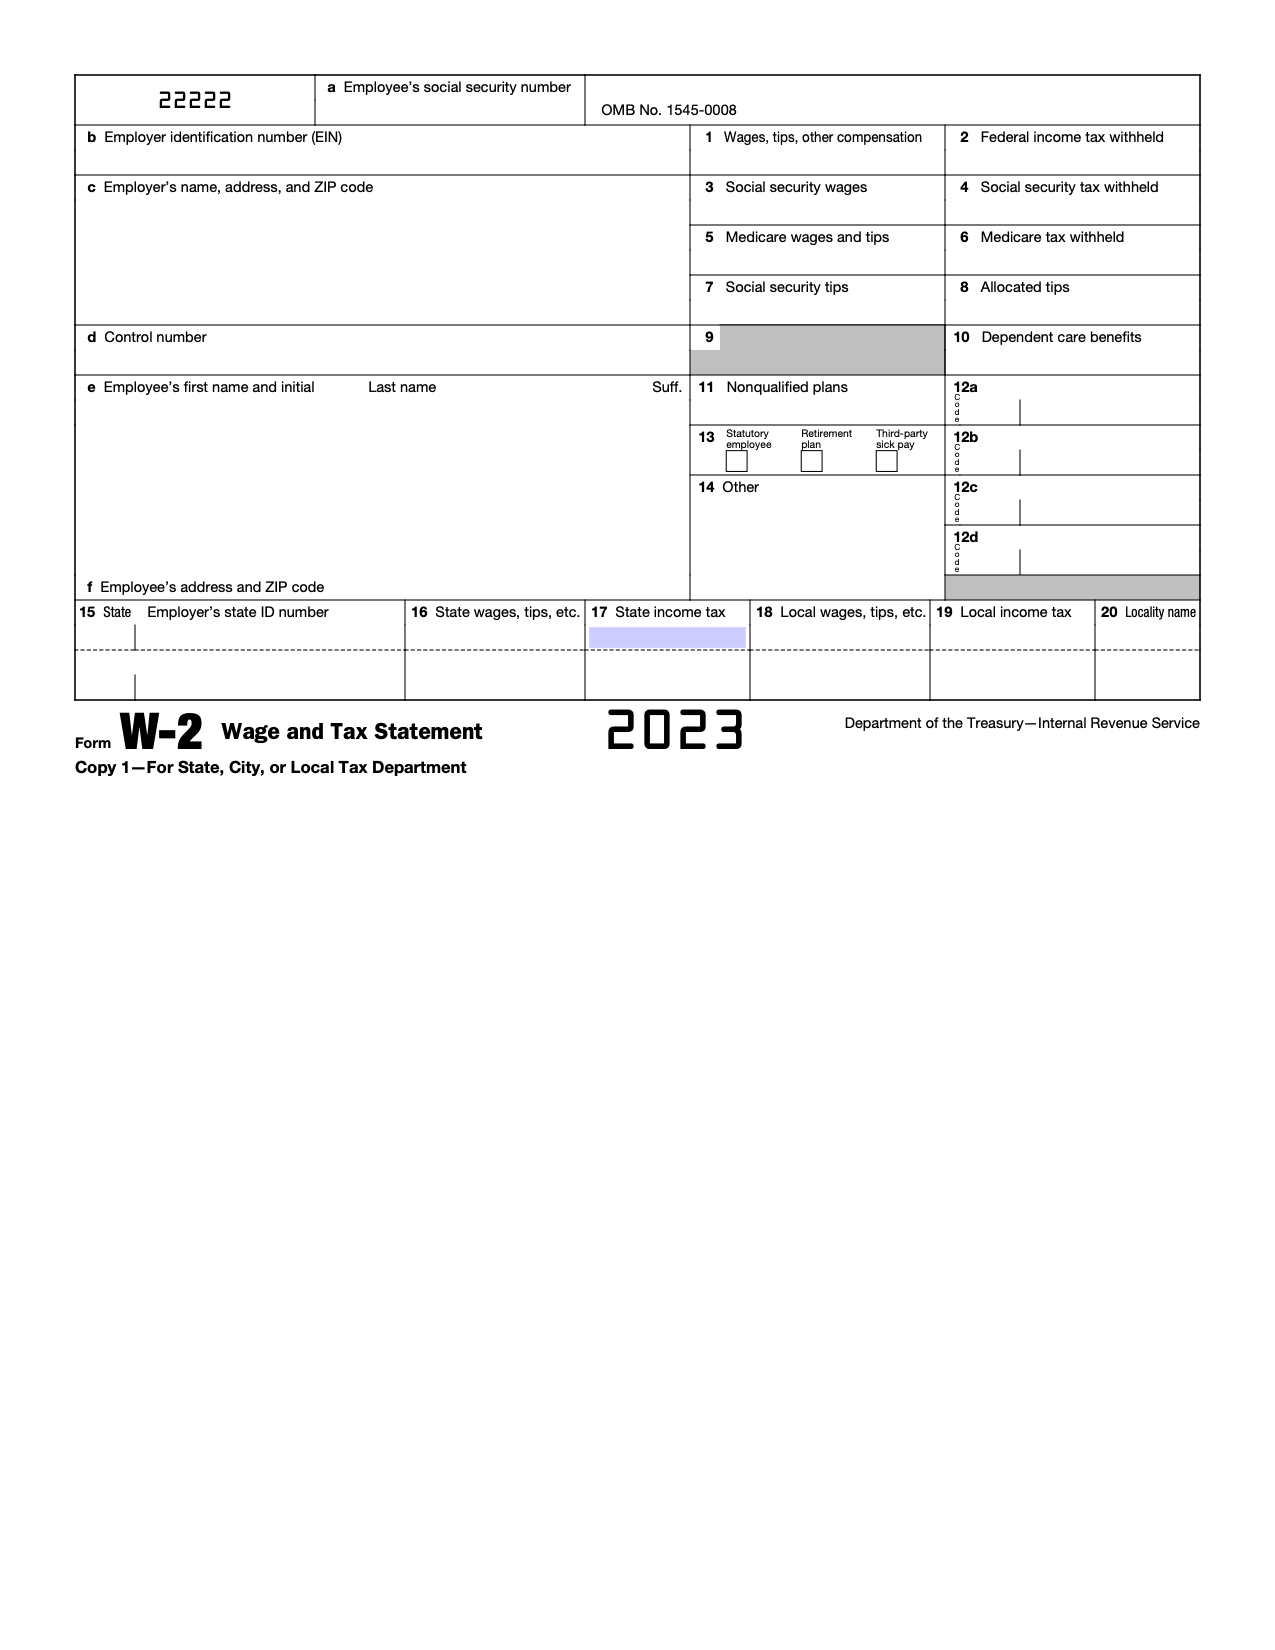 Free Irs Form W-2 | Wage And Tax Statement - Pdf – Eforms pertaining to Free W2 Form Generator